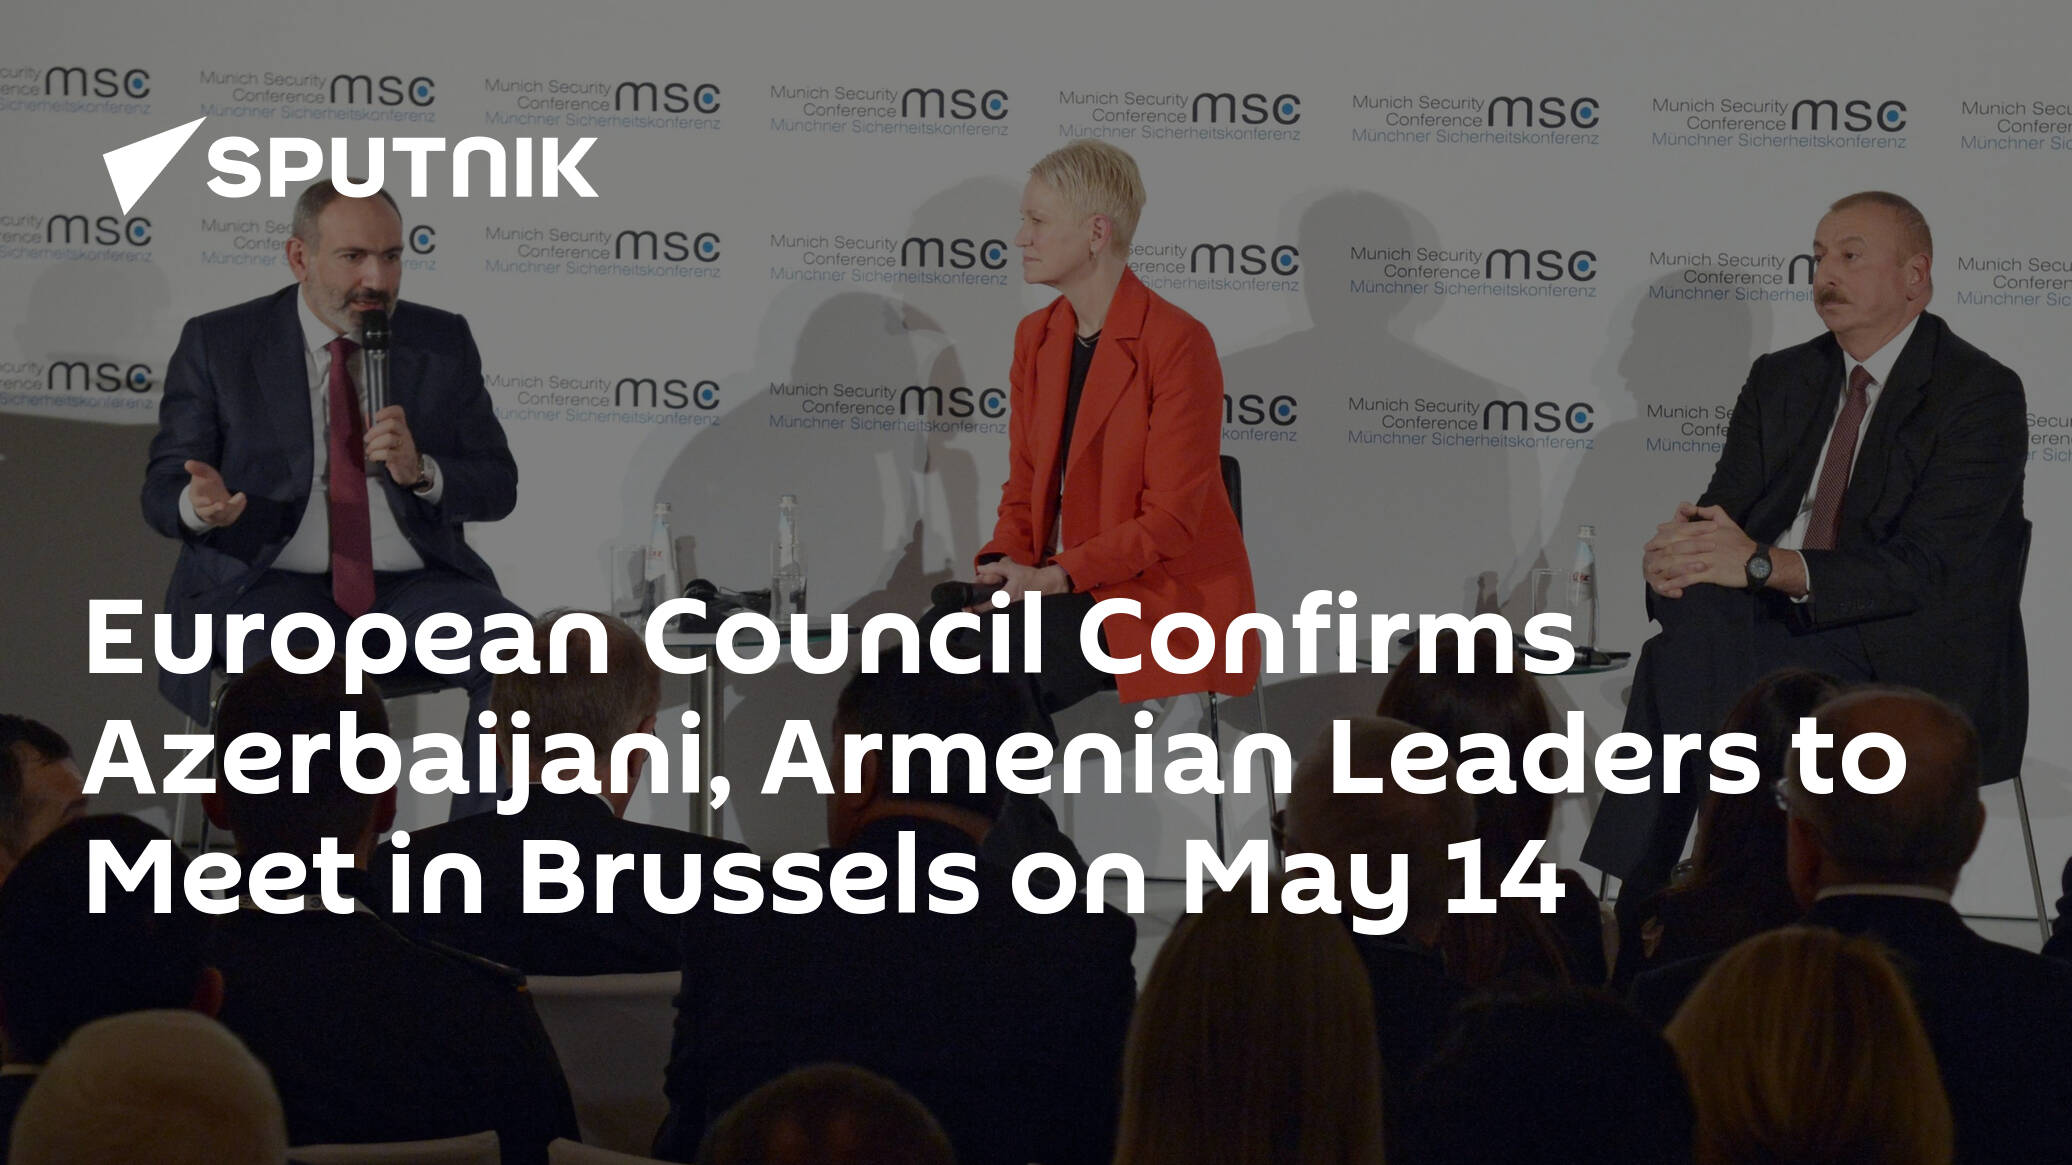 European Council Confirms Azerbaijani, Armenian Leaders to Meet in Brussels on May 14